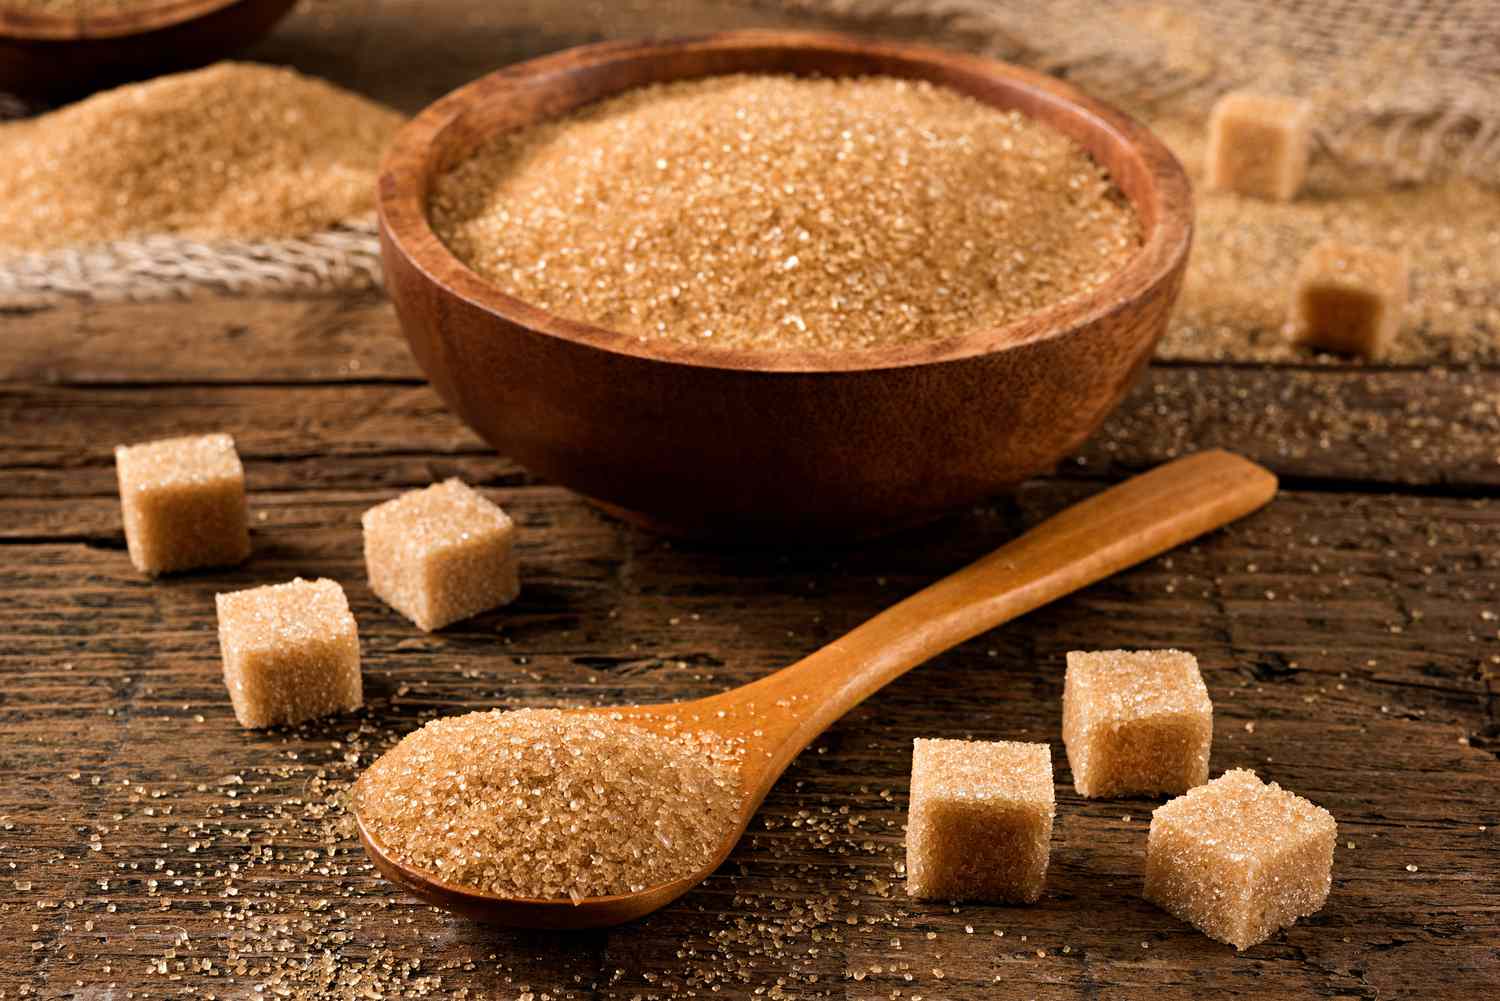 The medical advantages of Earthy Brown Sugar